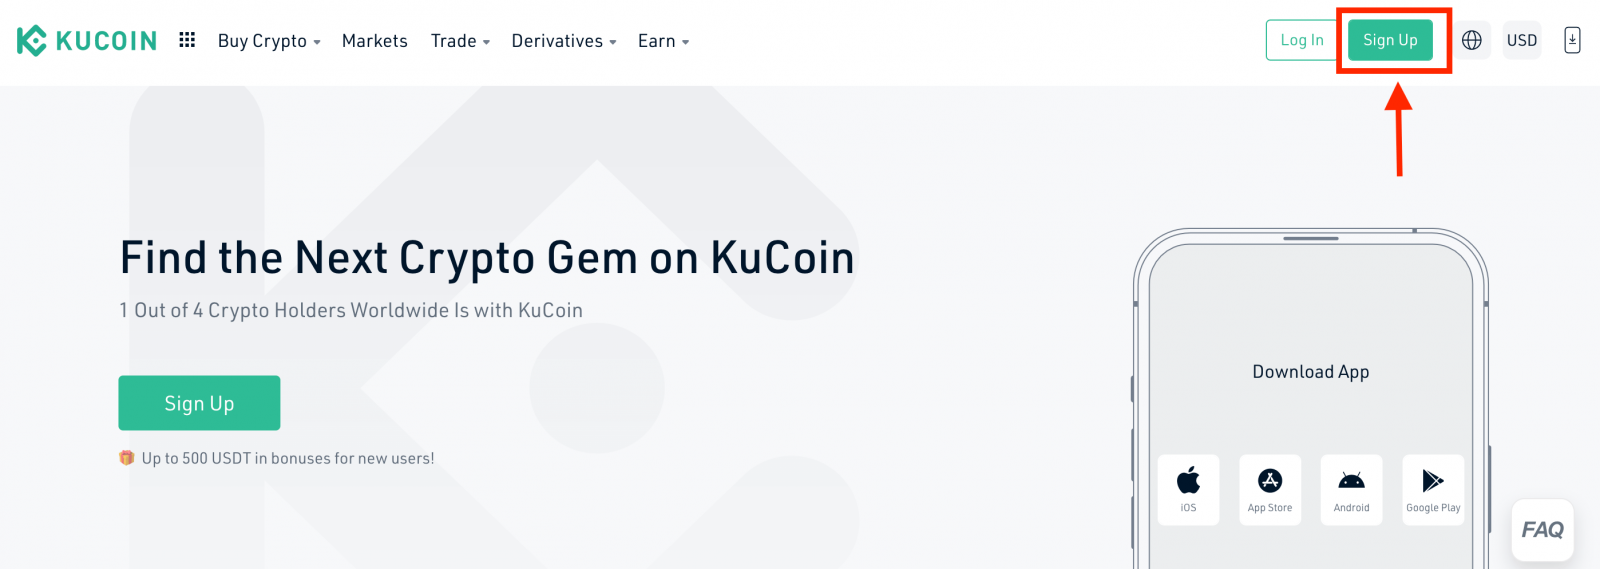 How to Start KuCoin Trading in 2021: A Step-By-Step Guide for Beginners